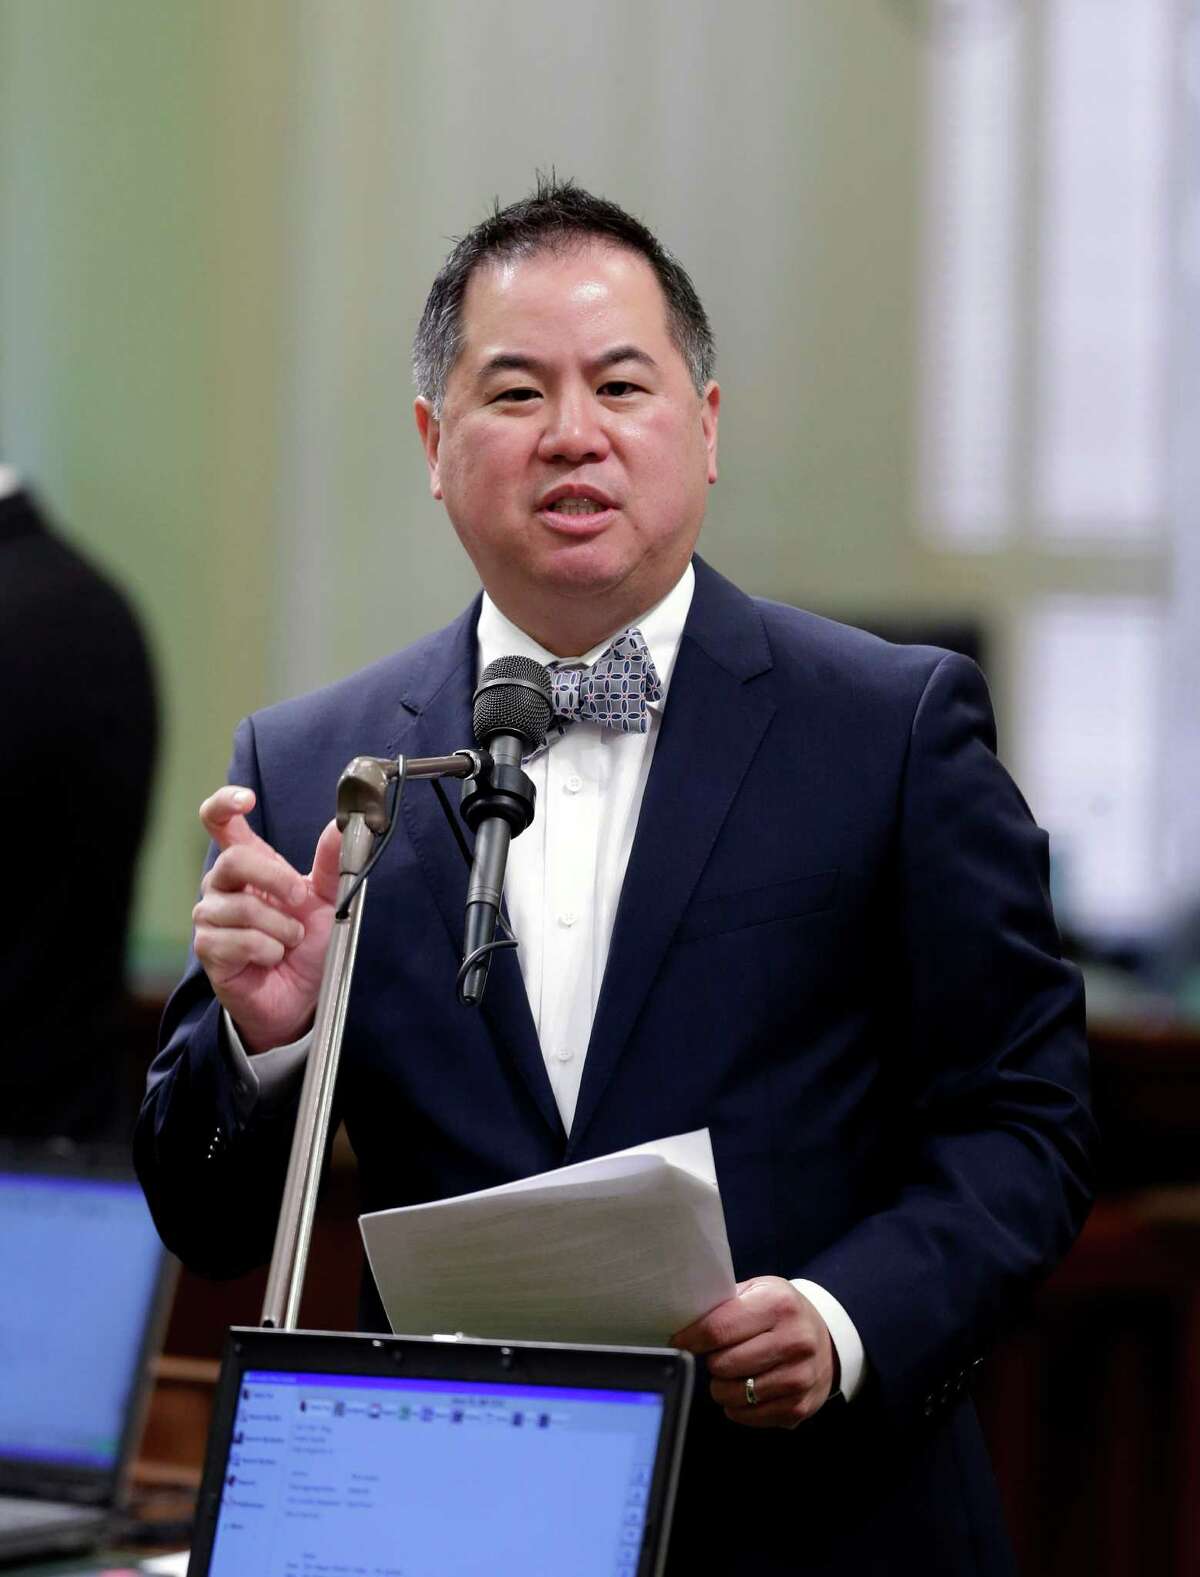 Assemblyman Phil Ting, D-San Francisco, said failure shouldn’t be rewarded over success when it comes to superintendent pay